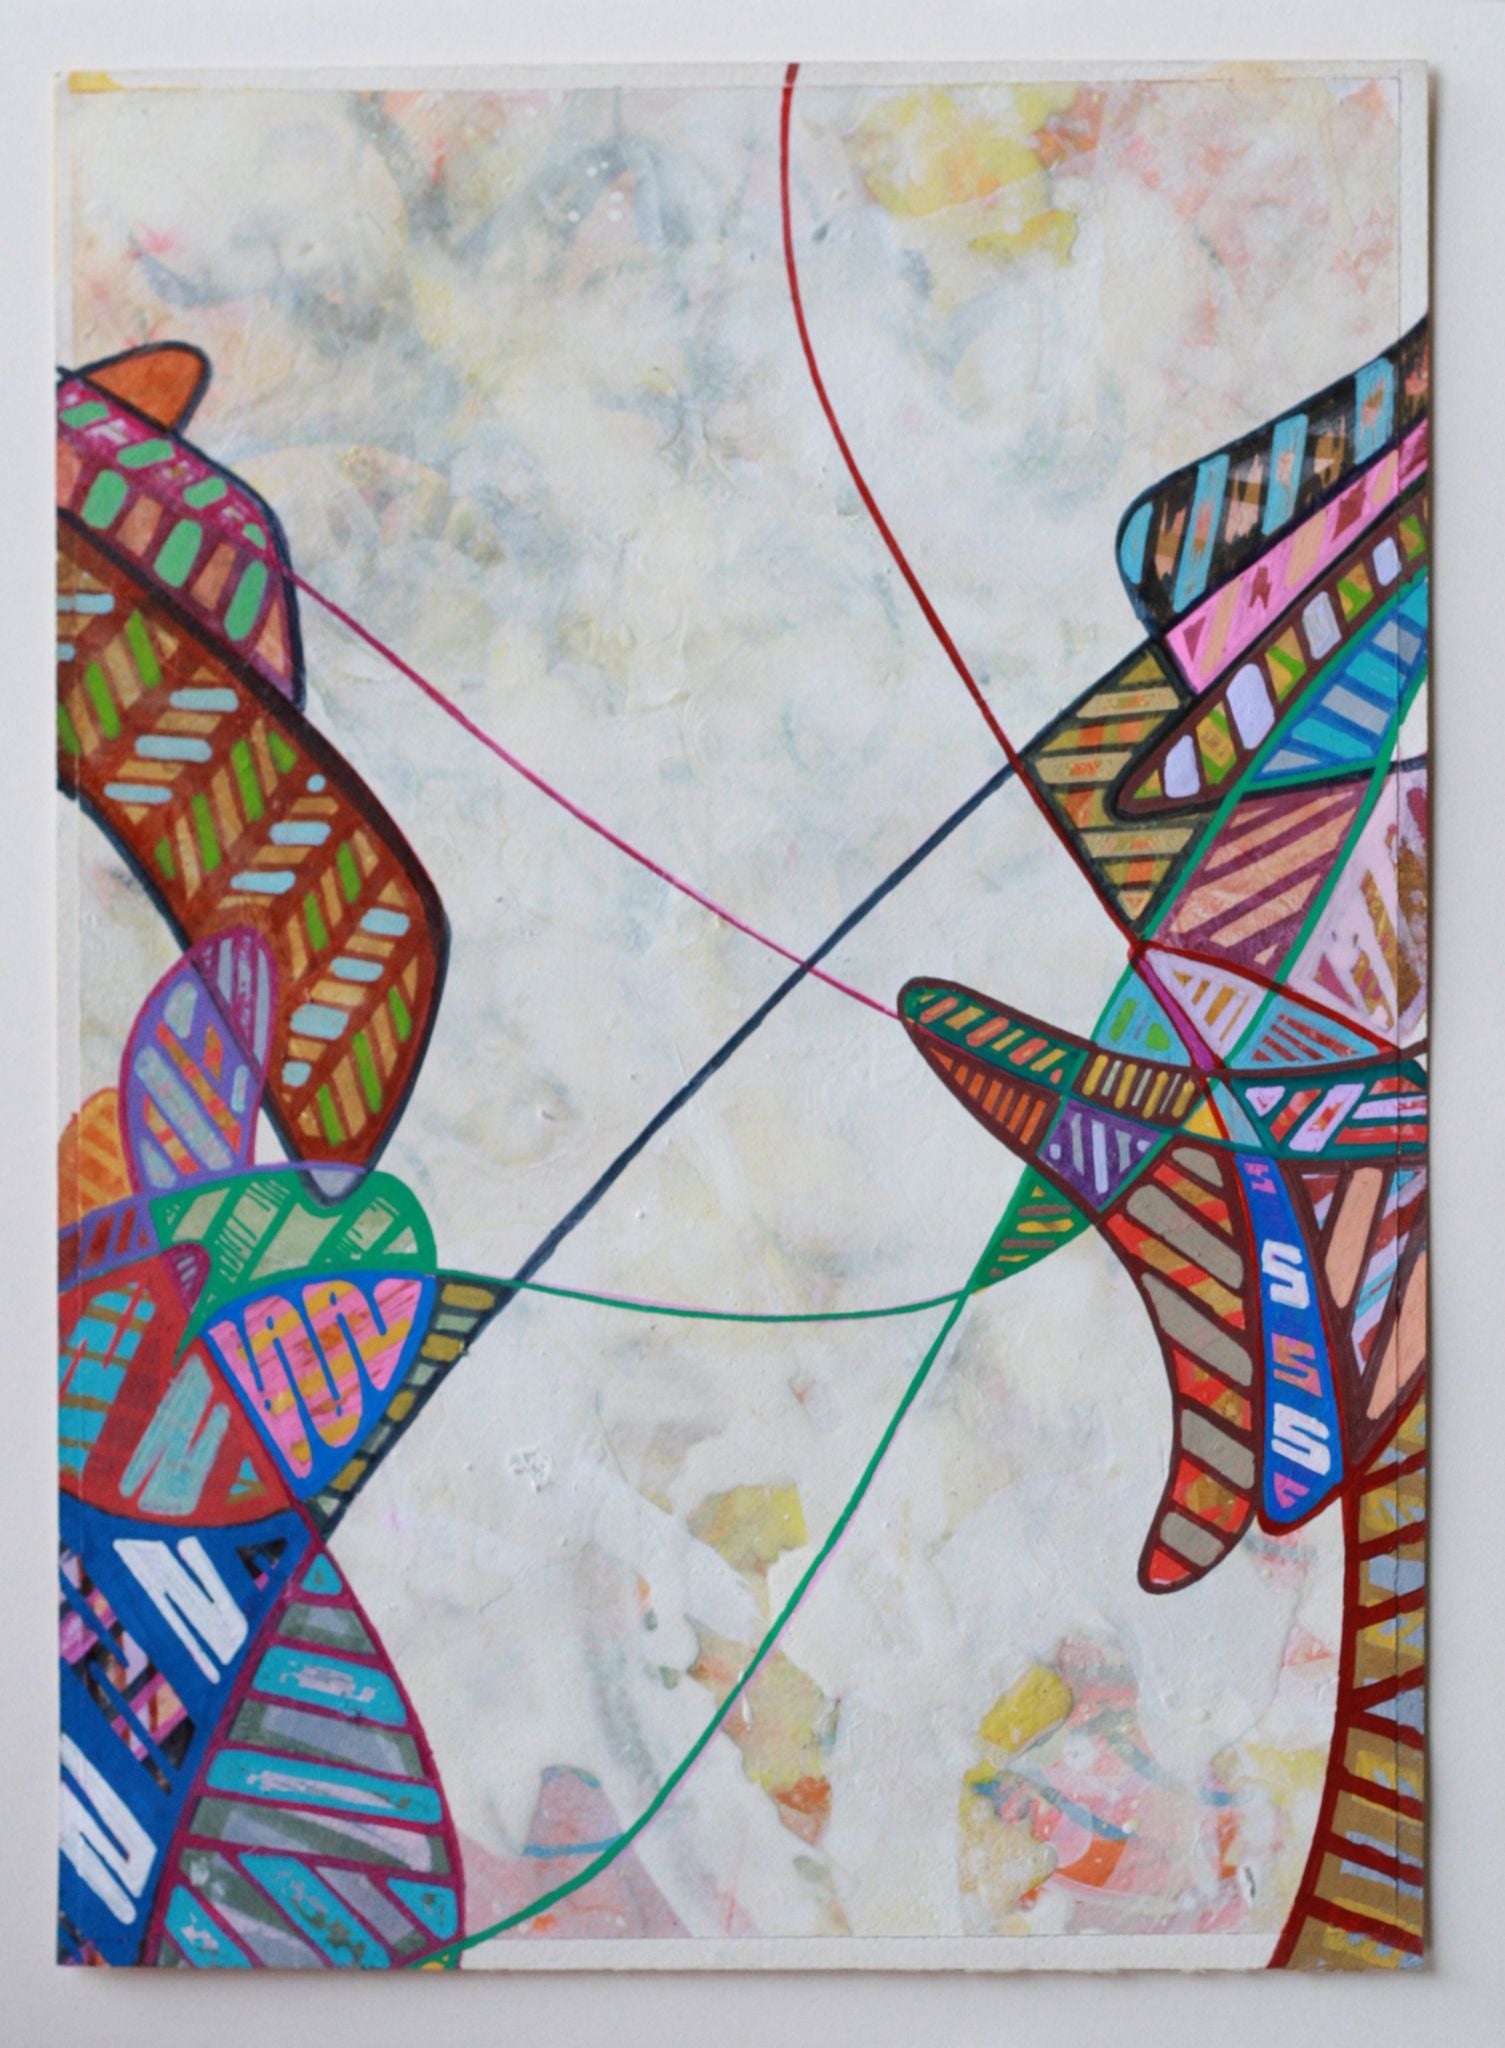 Pablo Power, "Compass Points/Forming Patterns Study 16" SOLD